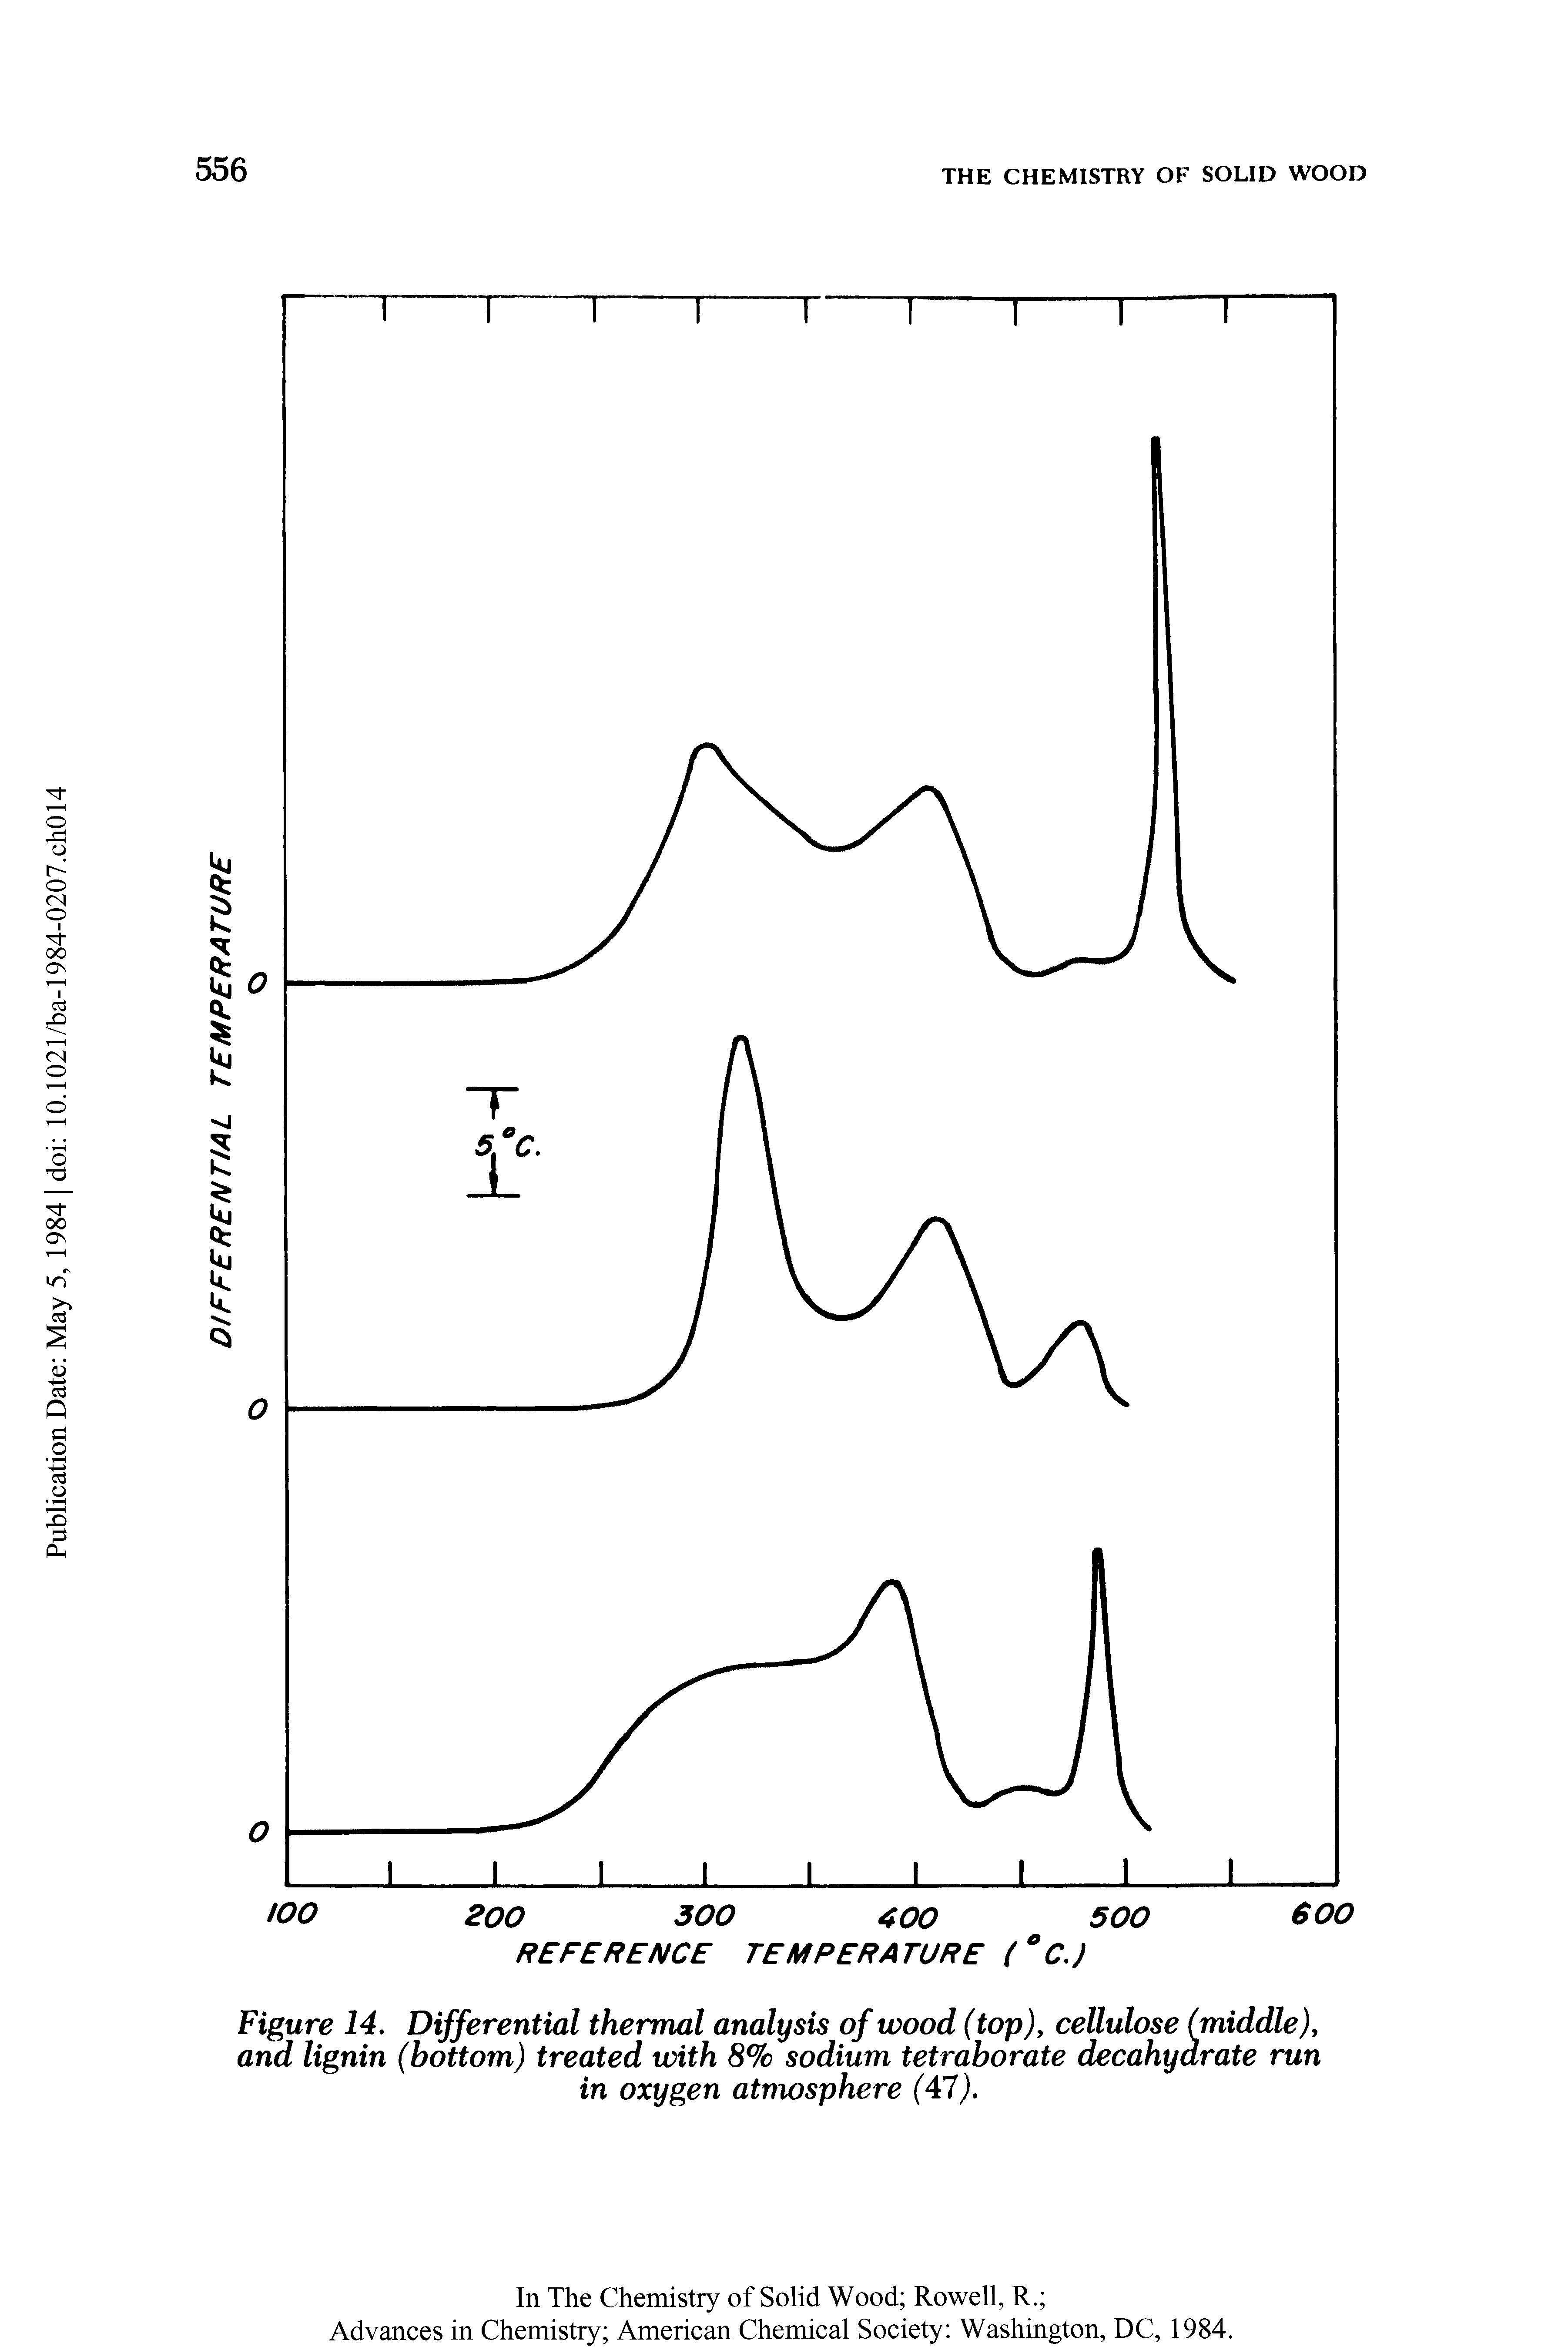 Figure 14, Differential thermal analysis of wood (top), cellulose (middle), and lignin (bottom) treated with 8% sodium tetraborate decahyarate run in oxygen atmosphere (47).